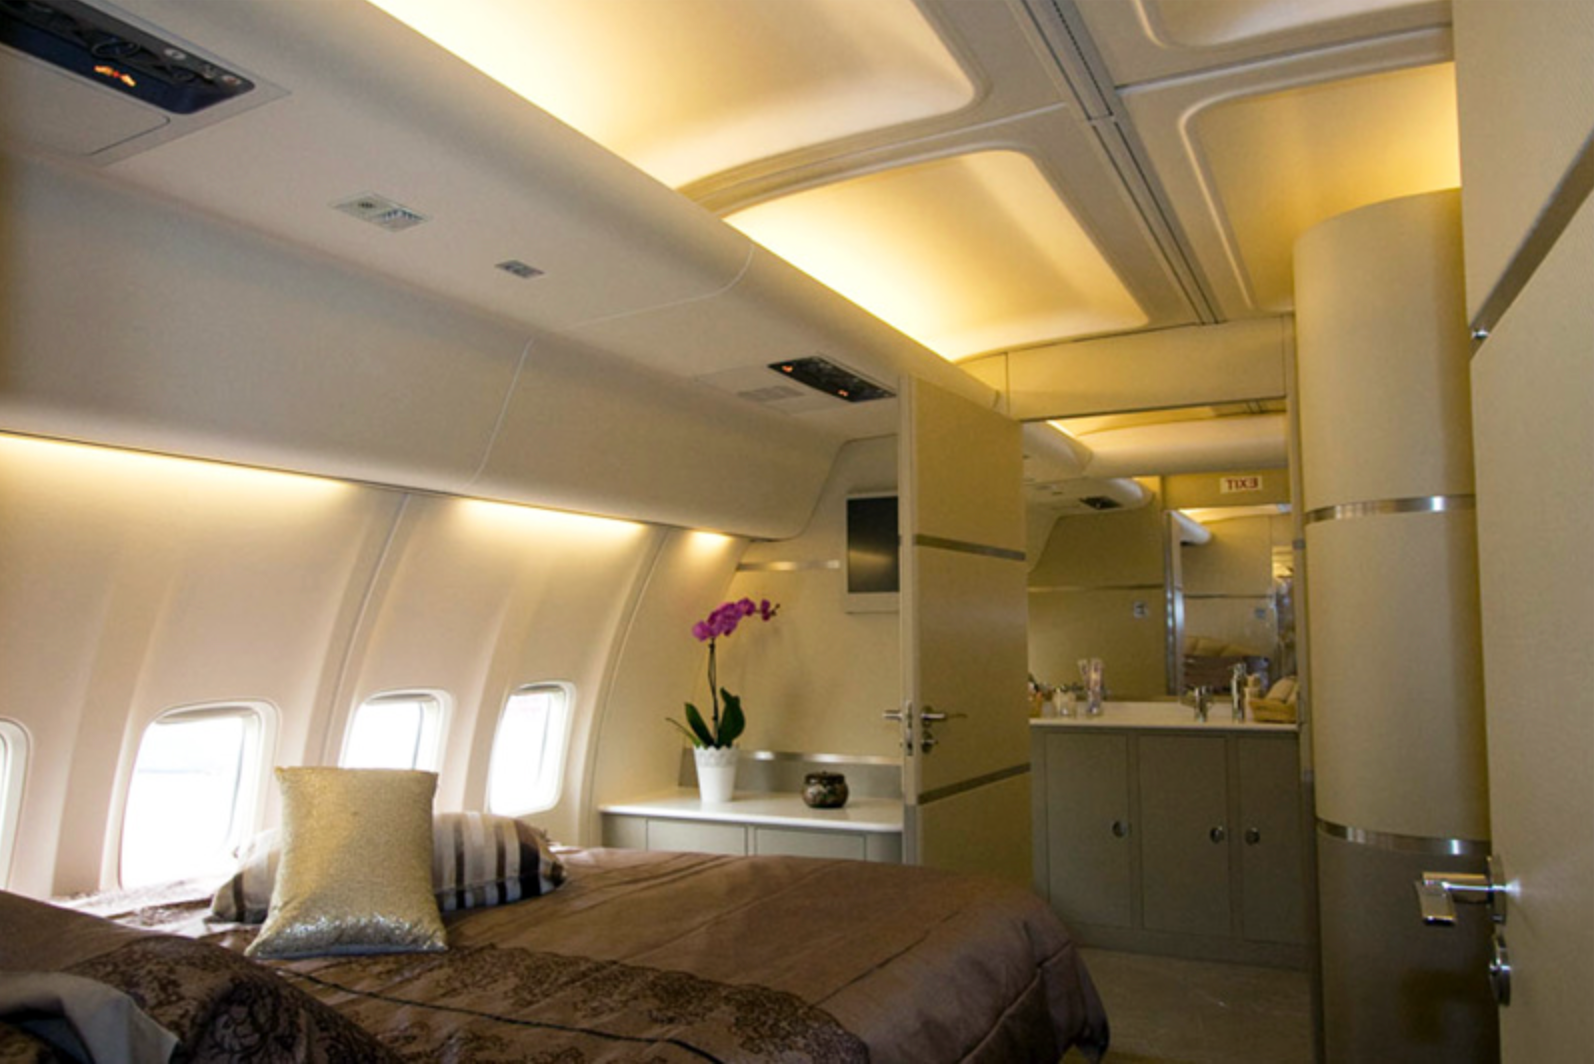 The VIP stateroom of a Boeing 757-200.